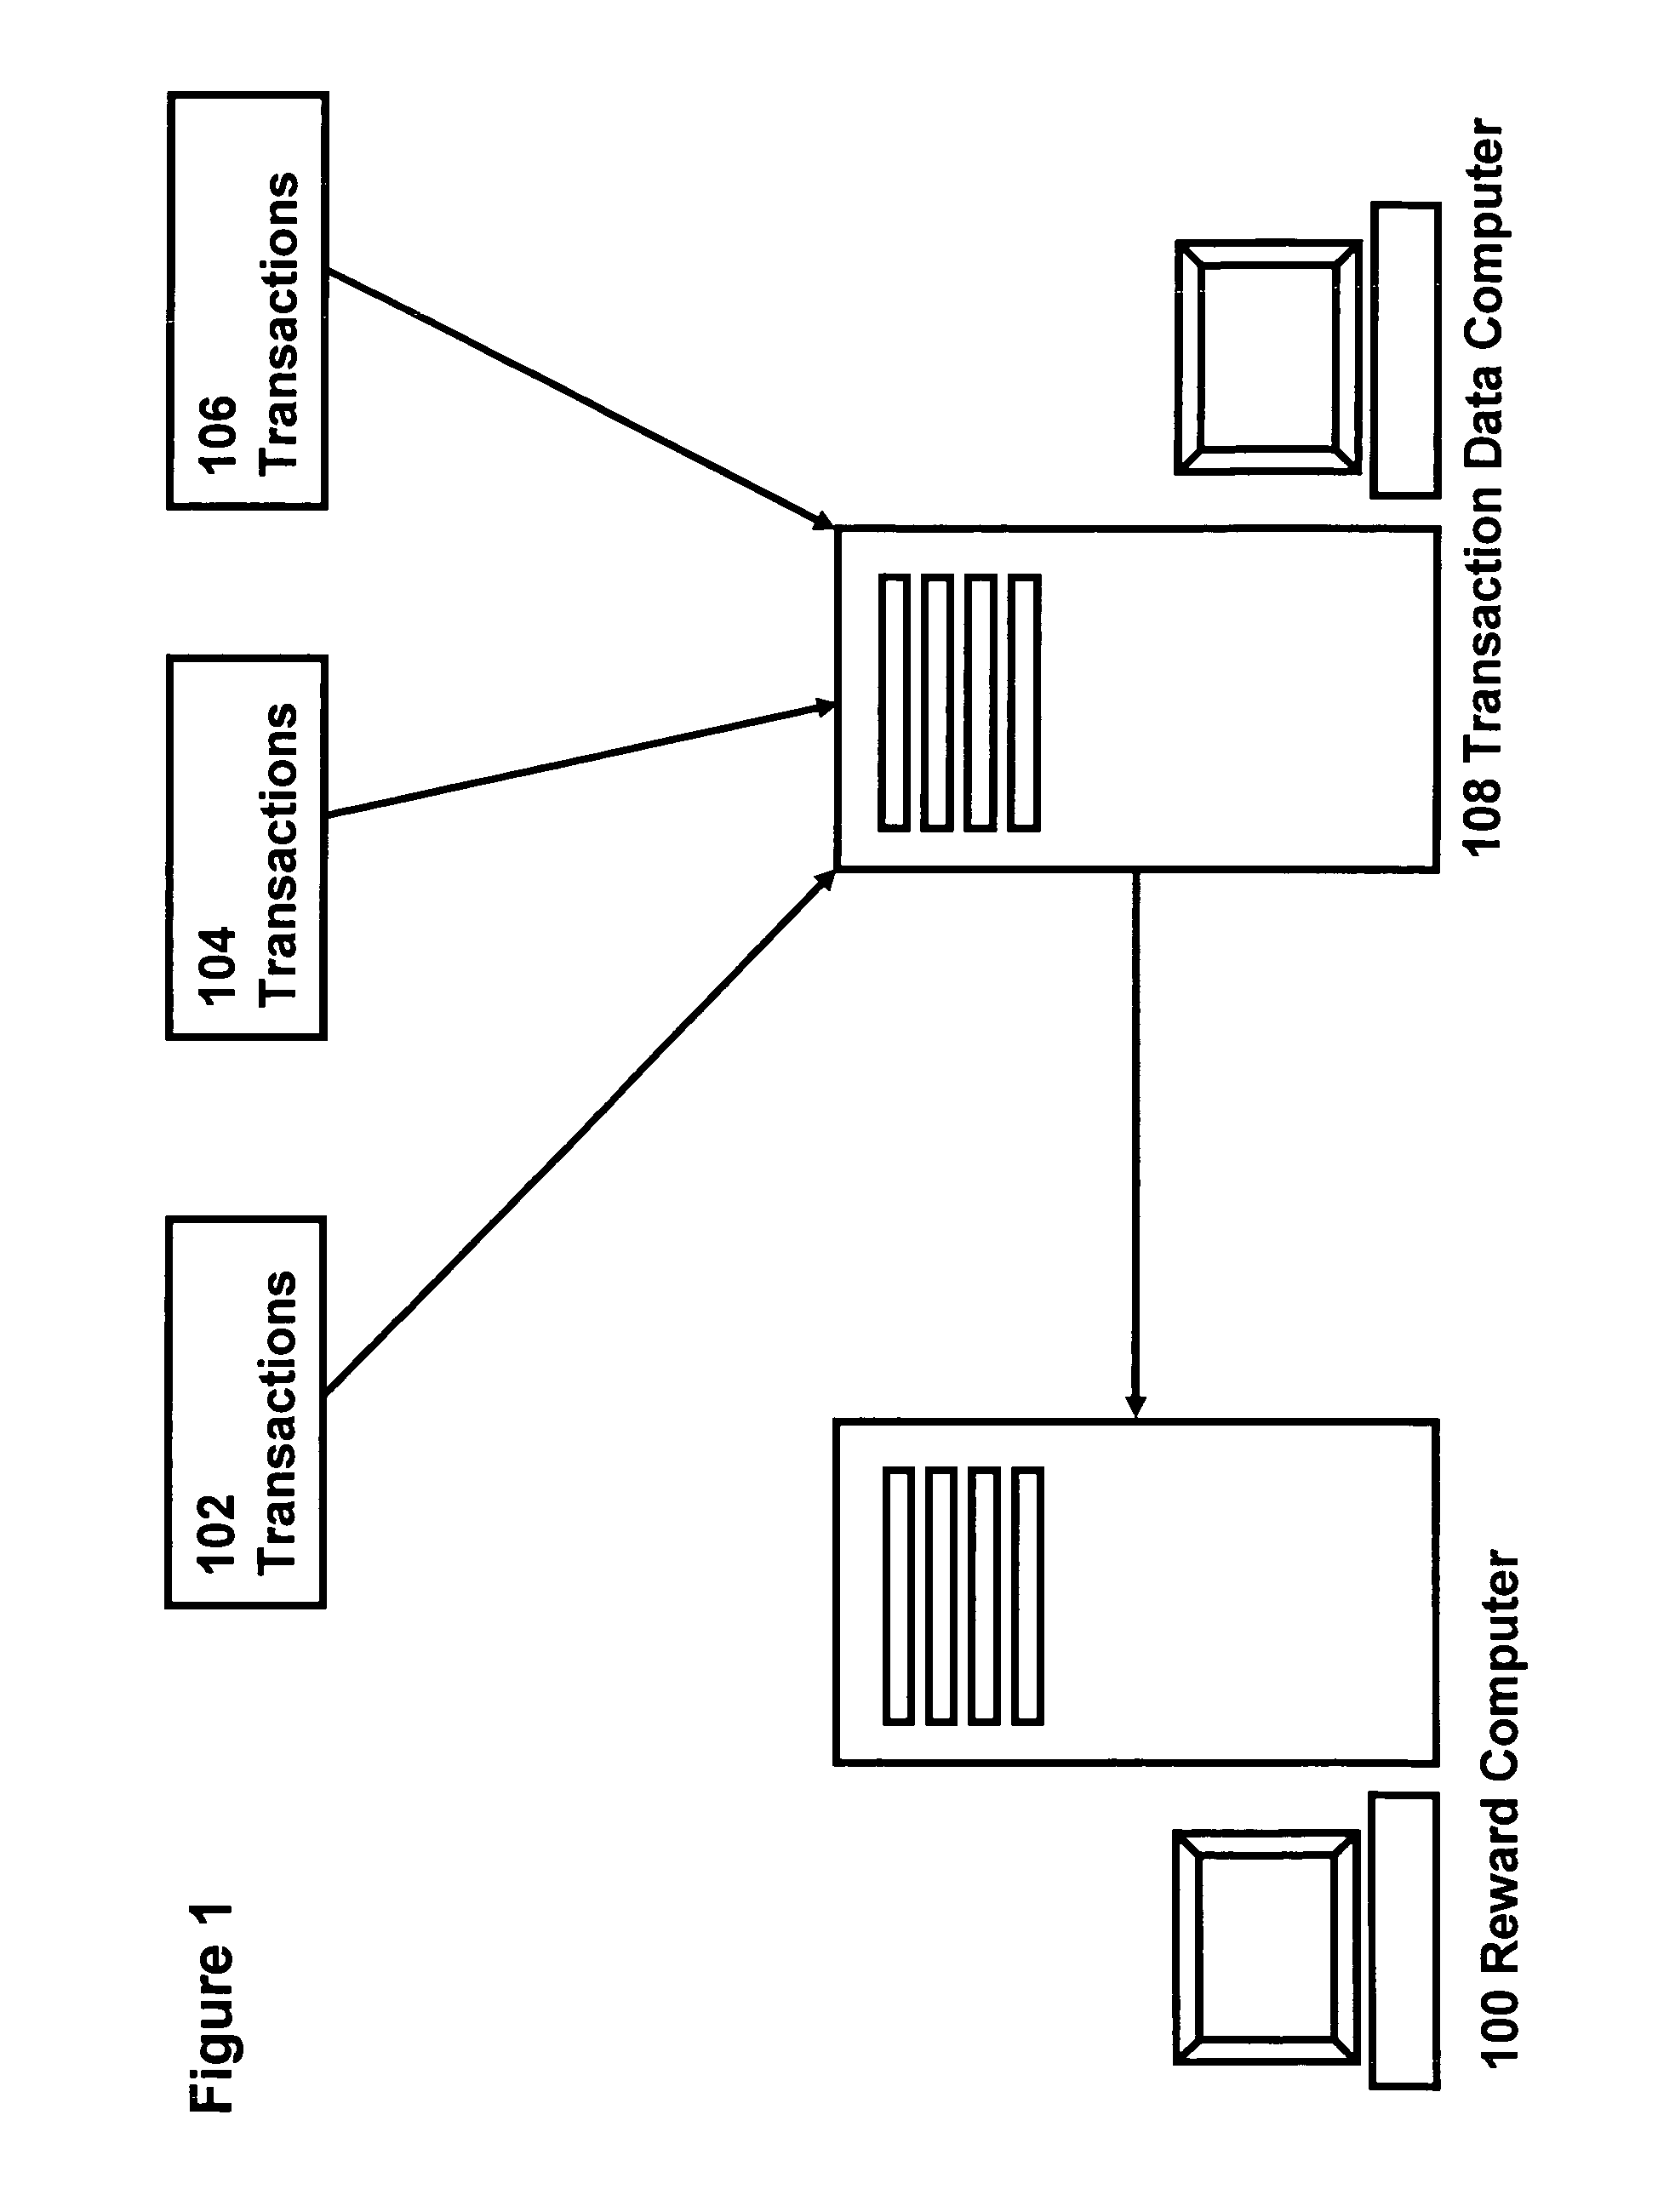 System and method for issuing rewards to card holders